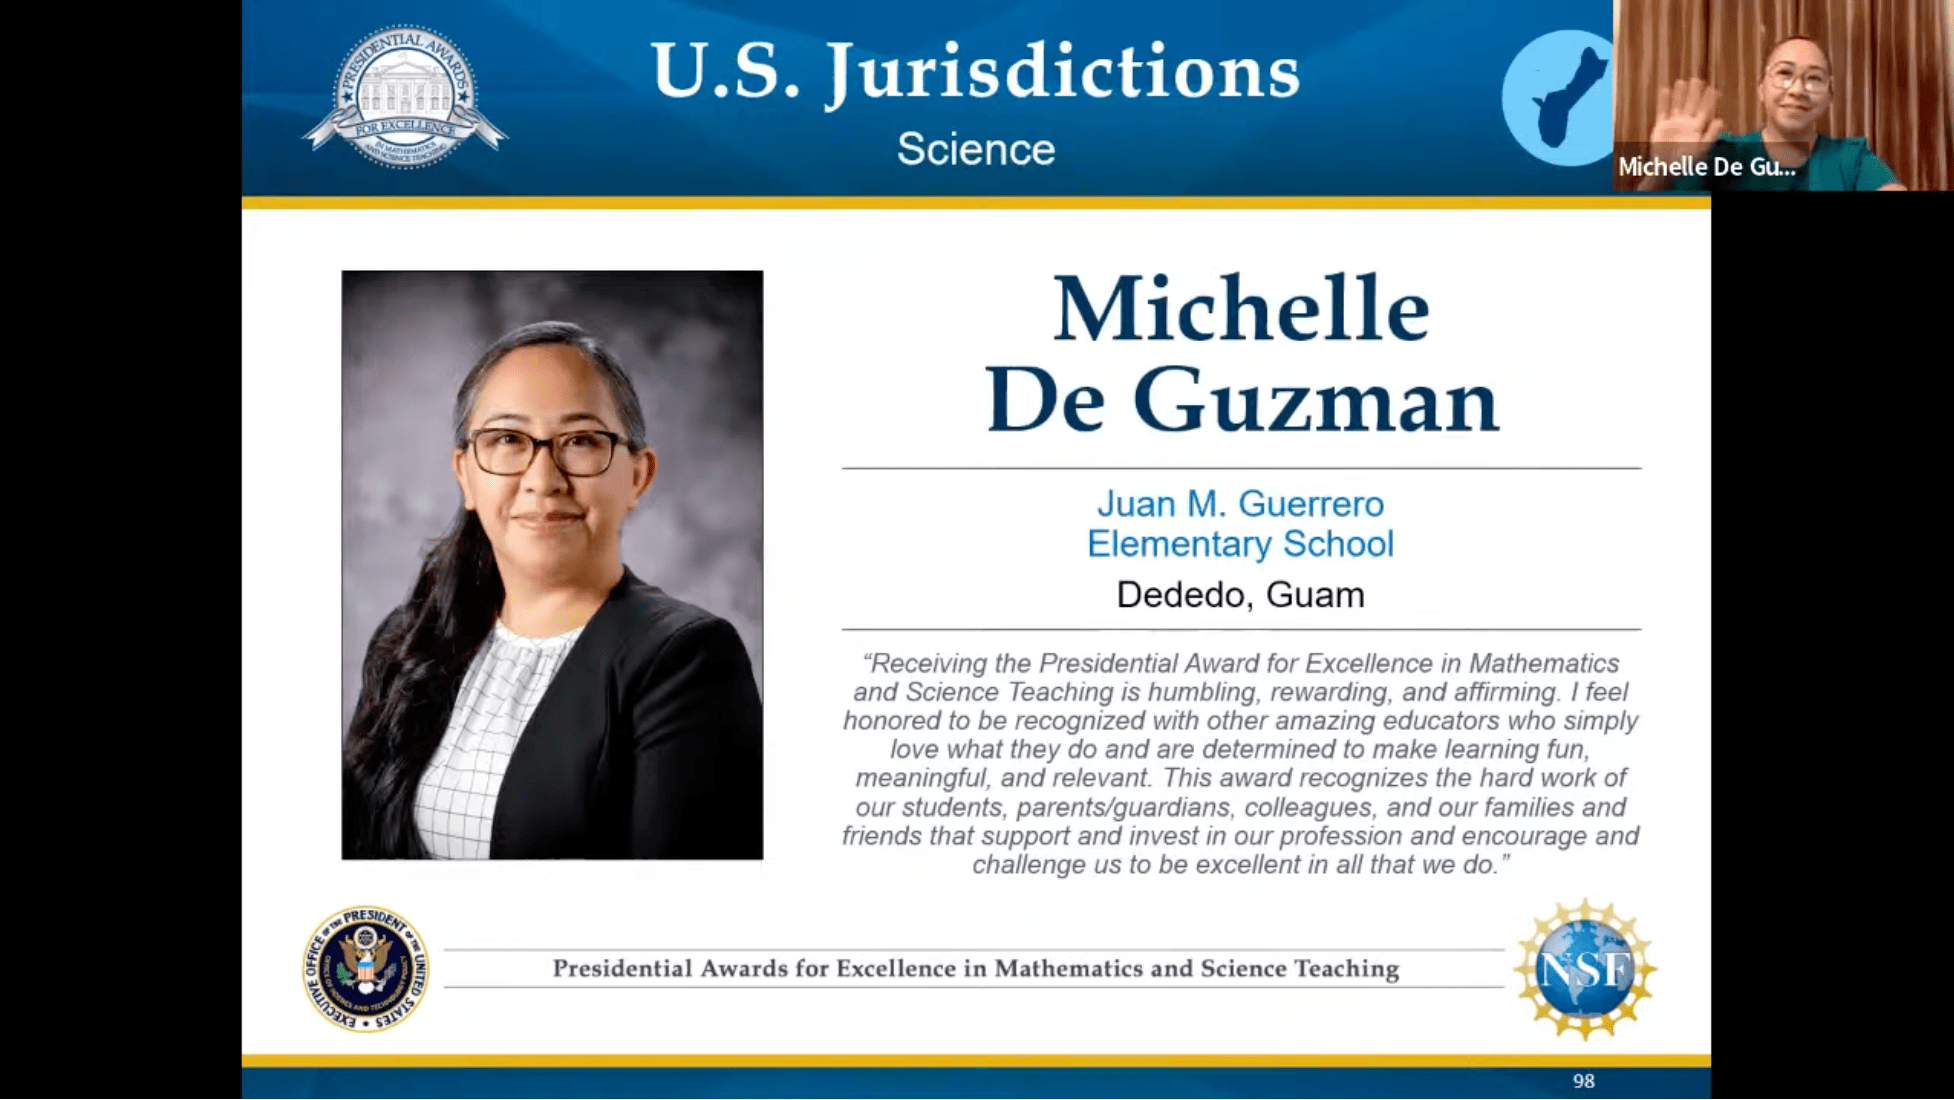 Michelle De Guzman is one of 102 teachers selected for the nation's highest award in STEM teaching.